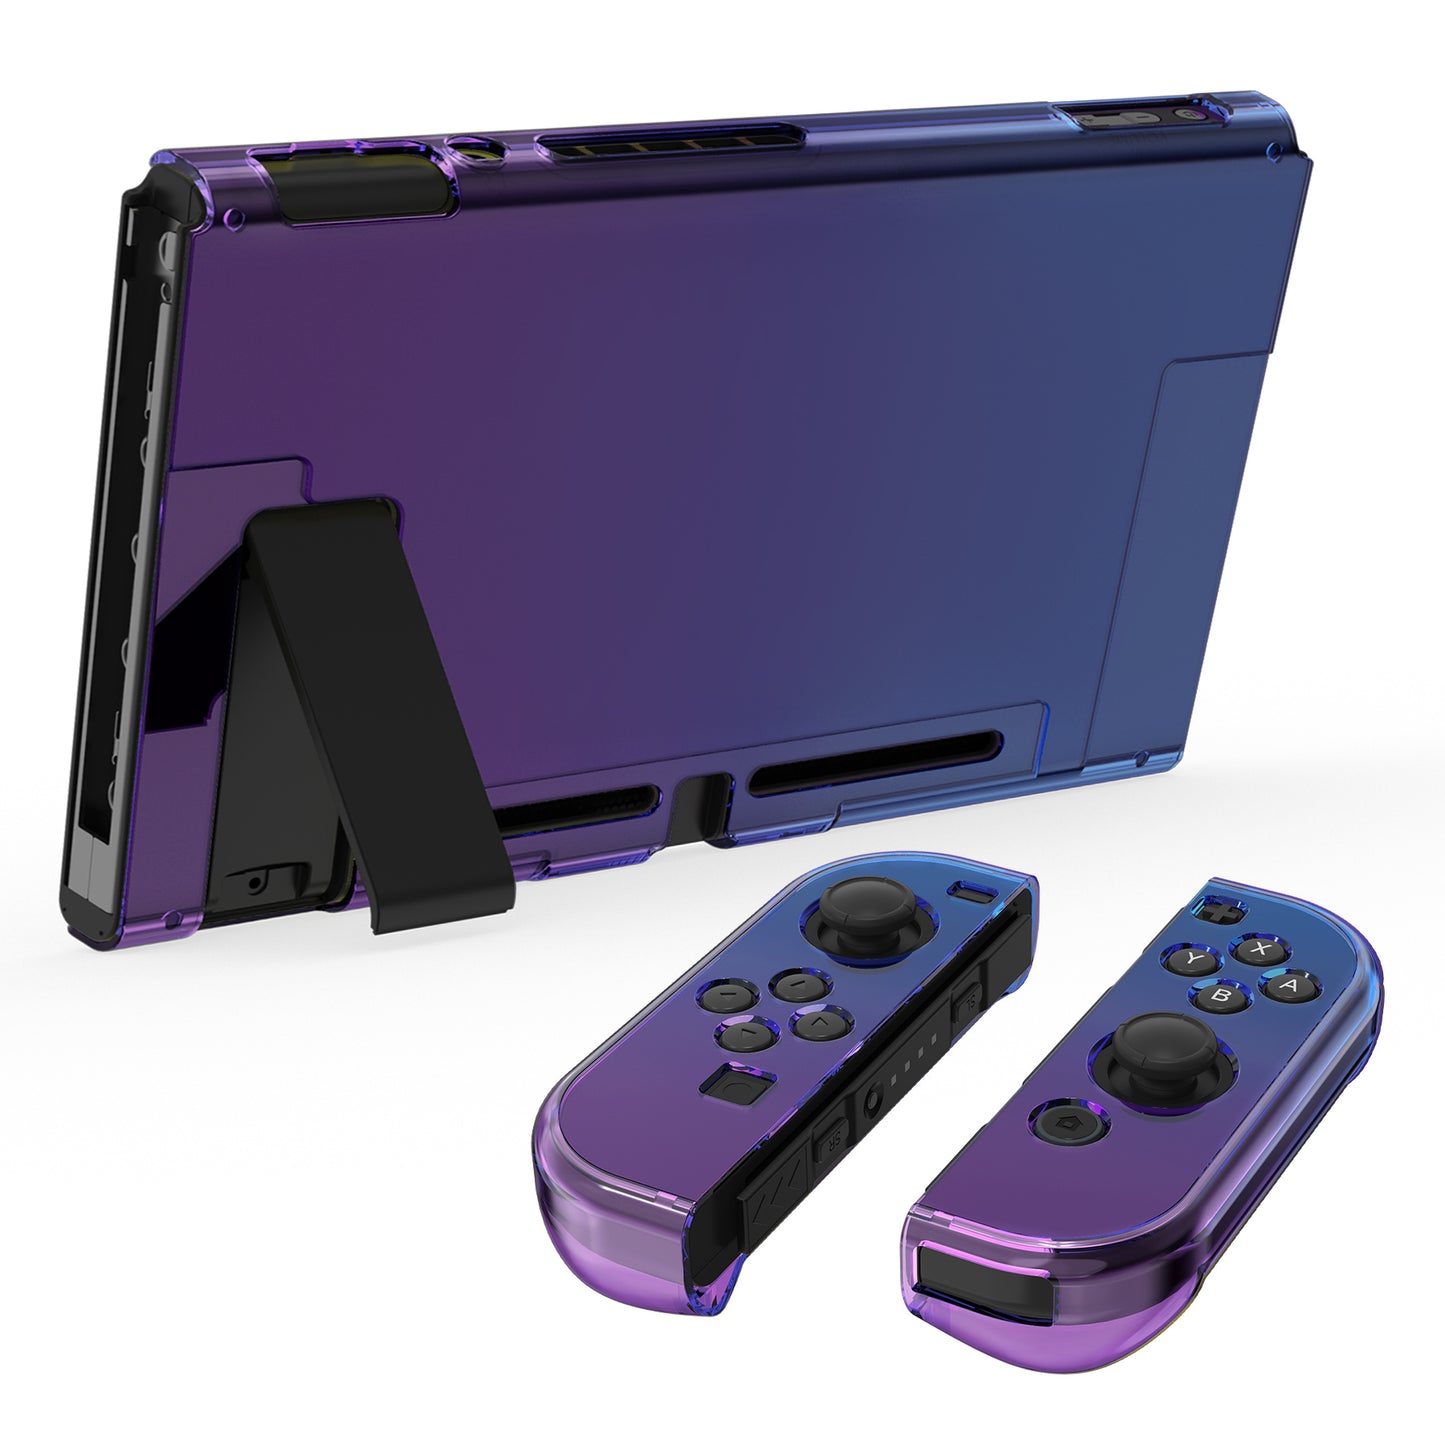 PlayVital Gradient Translucent Bluebell Back Cover for Nintendo Switch Console, NS Joycon Handheld Controller Separable Protector Hard Shell, Soft Touch Customized Dockable Protective Case for Nintendo Switch - NTP347 PlayVital